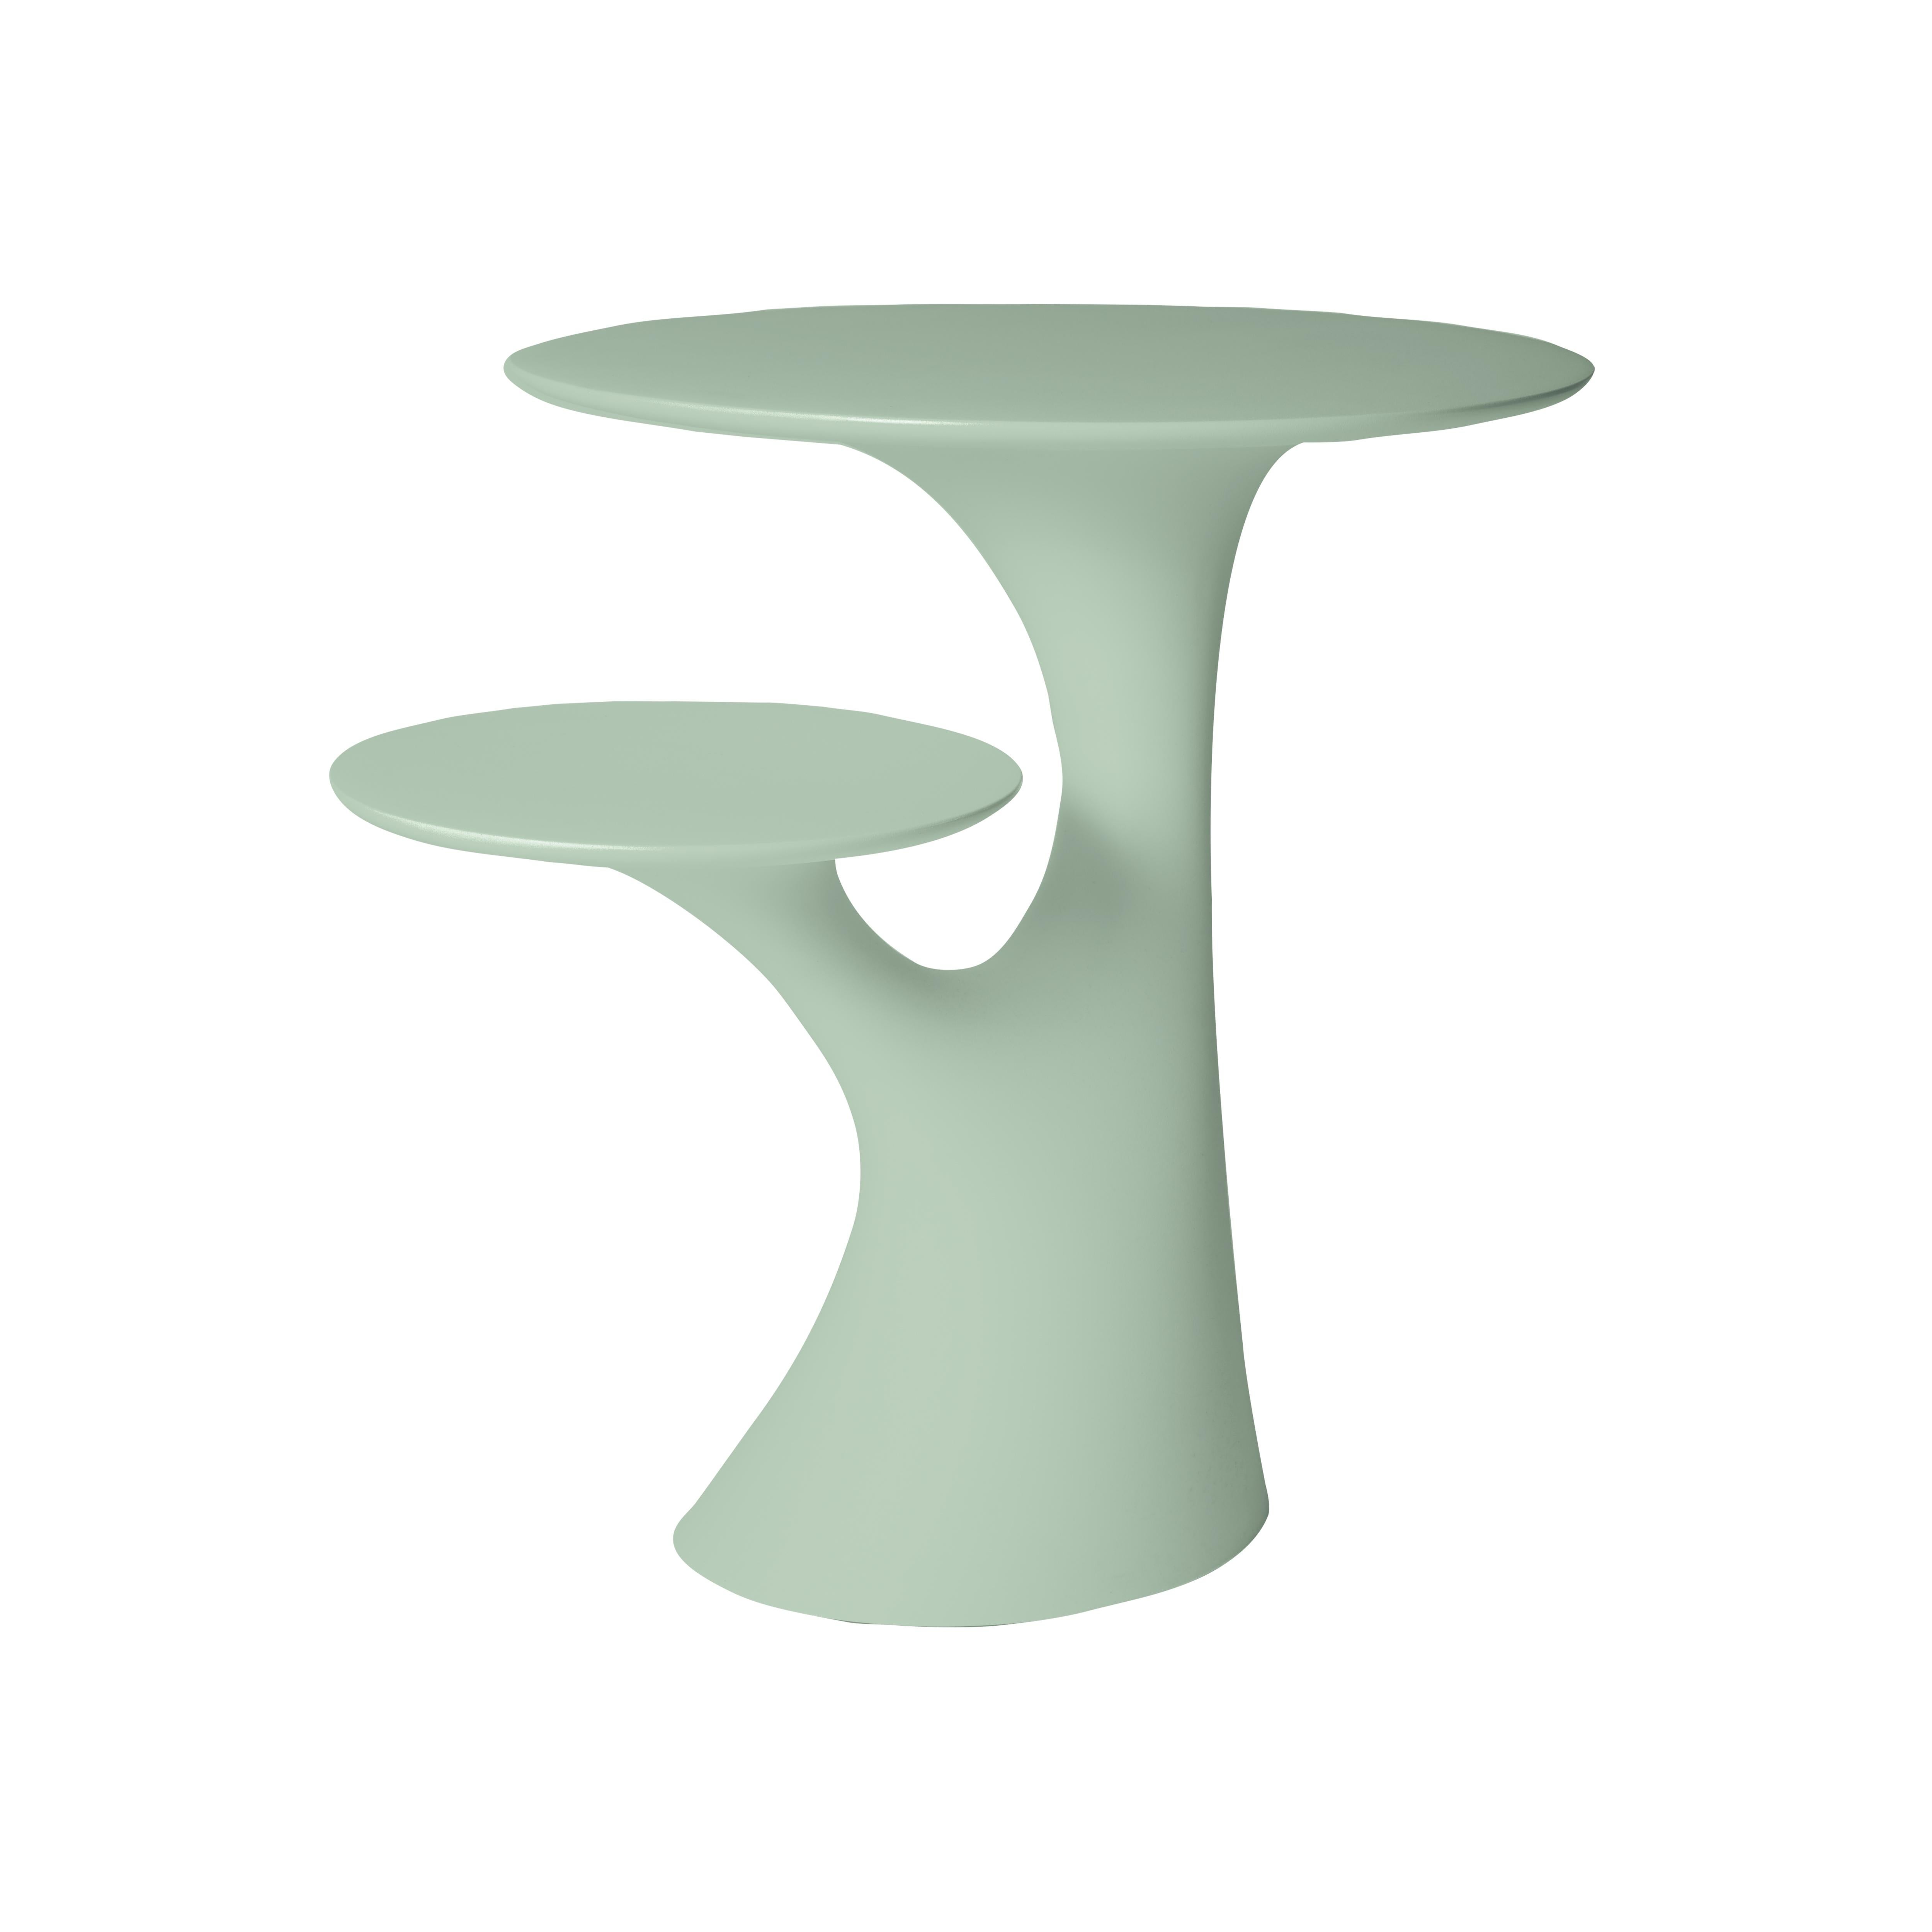 For Sale: Green (Balsam Green) Modern Plastic White Gray Green Pink or Tree Side Table by Stefano Giovannoni 2